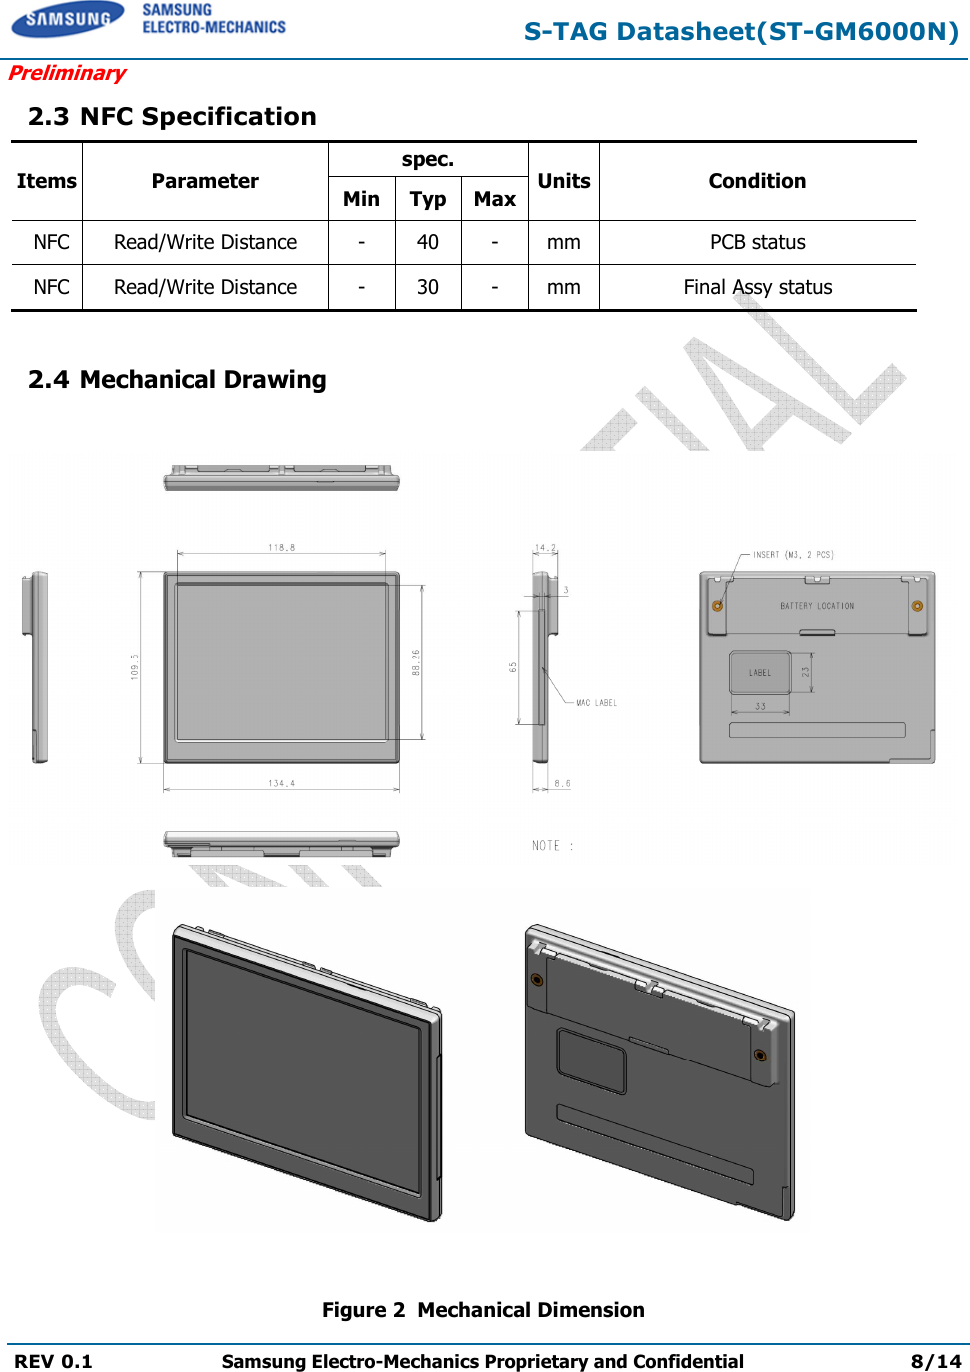 S-TAG Datasheet(ST-GM6000N) Preliminary REV 0.1  Samsung Electro-Mechanics Proprietary and Confidential 8/14 2.3 NFC Specification Items Parameter spec. Units Condition Min Typ Max NFC Read/Write Distance - 40 - mm PCB status NFC Read/Write Distance - 30 - mm Final Assy status 2.4 Mechanical Drawing Figure 2  Mechanical Dimension 